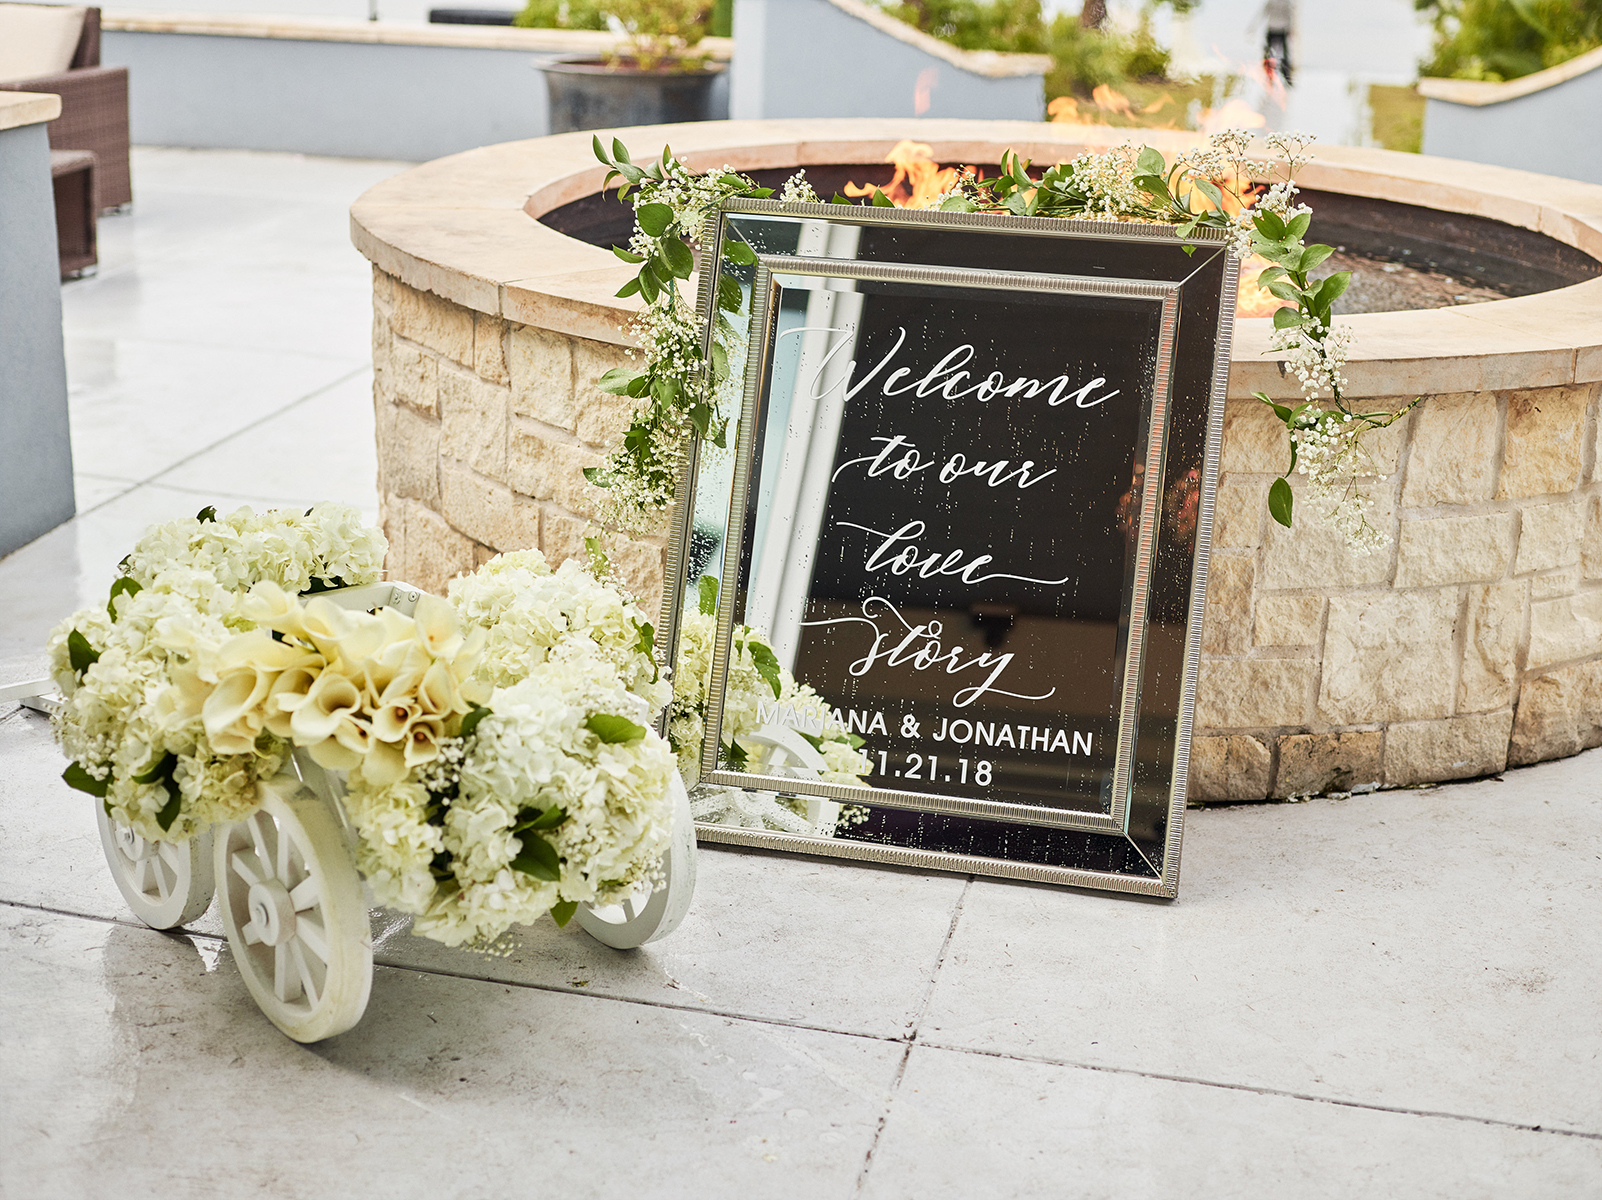 cute ideas for outdoor wedding ceremony - signage - mirror, flowers 